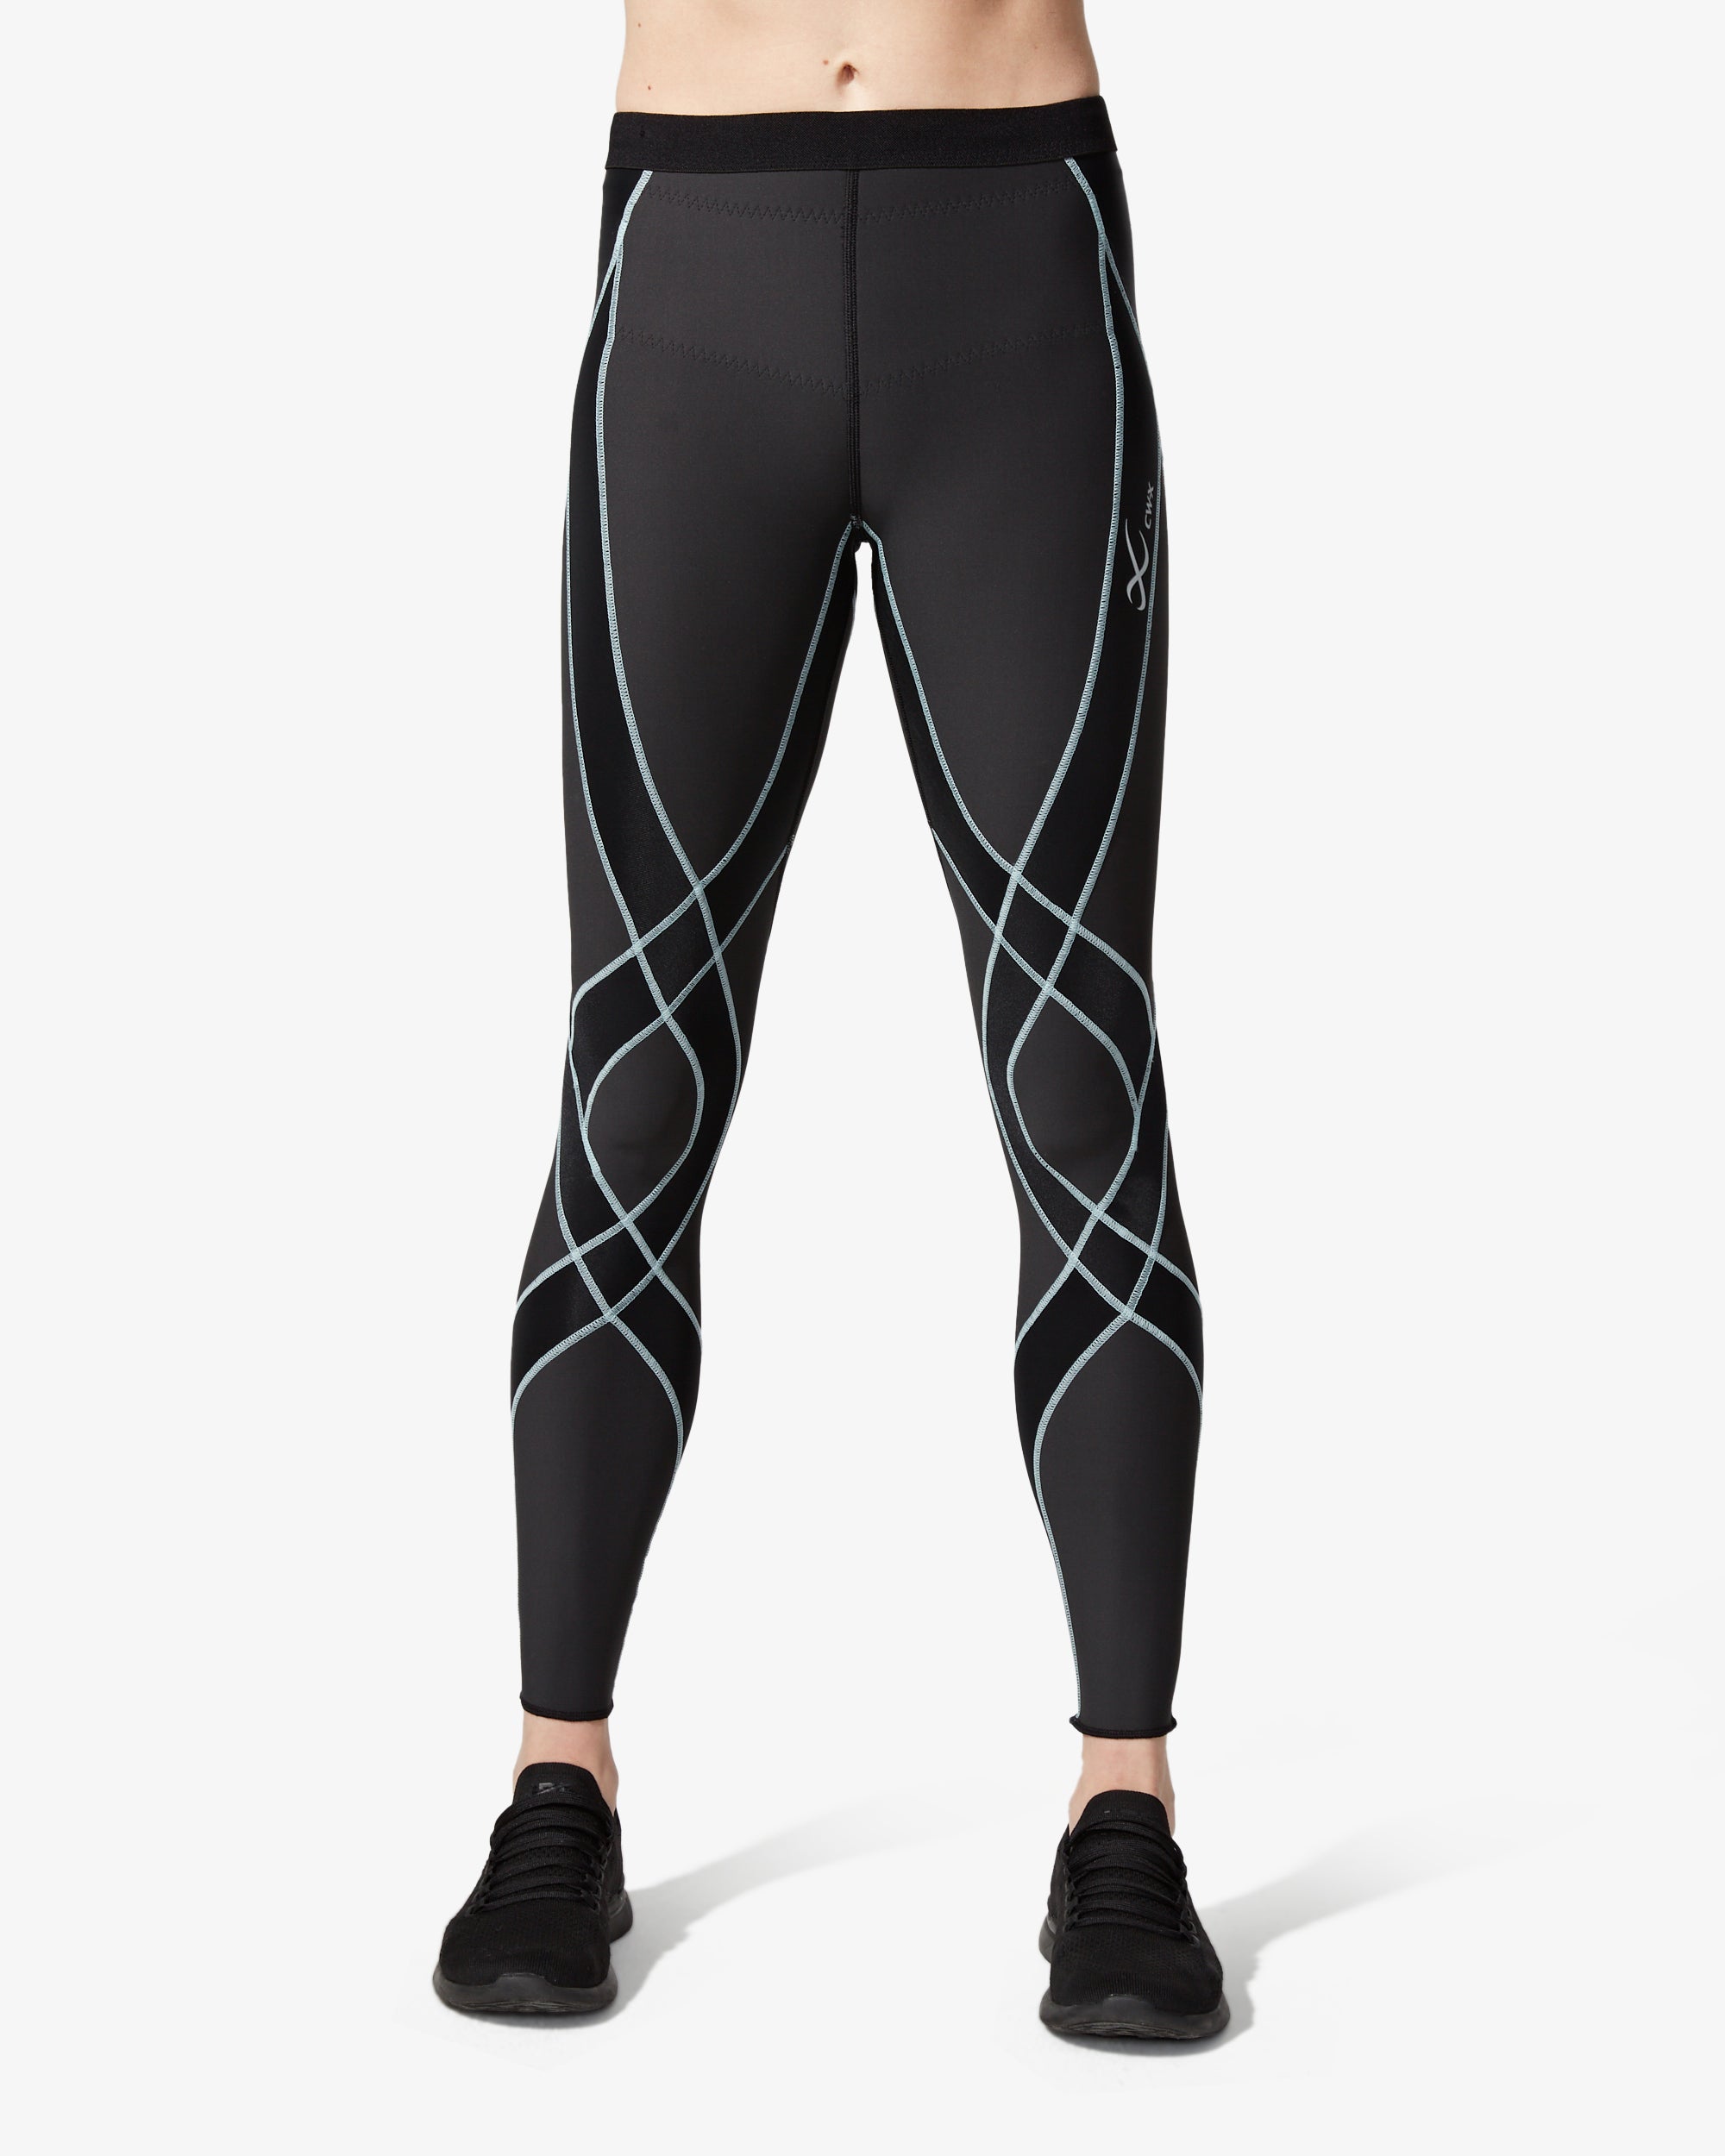 Endurance Generator Insulator Joint & Muscle Support Compression Tight -  Women's Black/Gray Sky